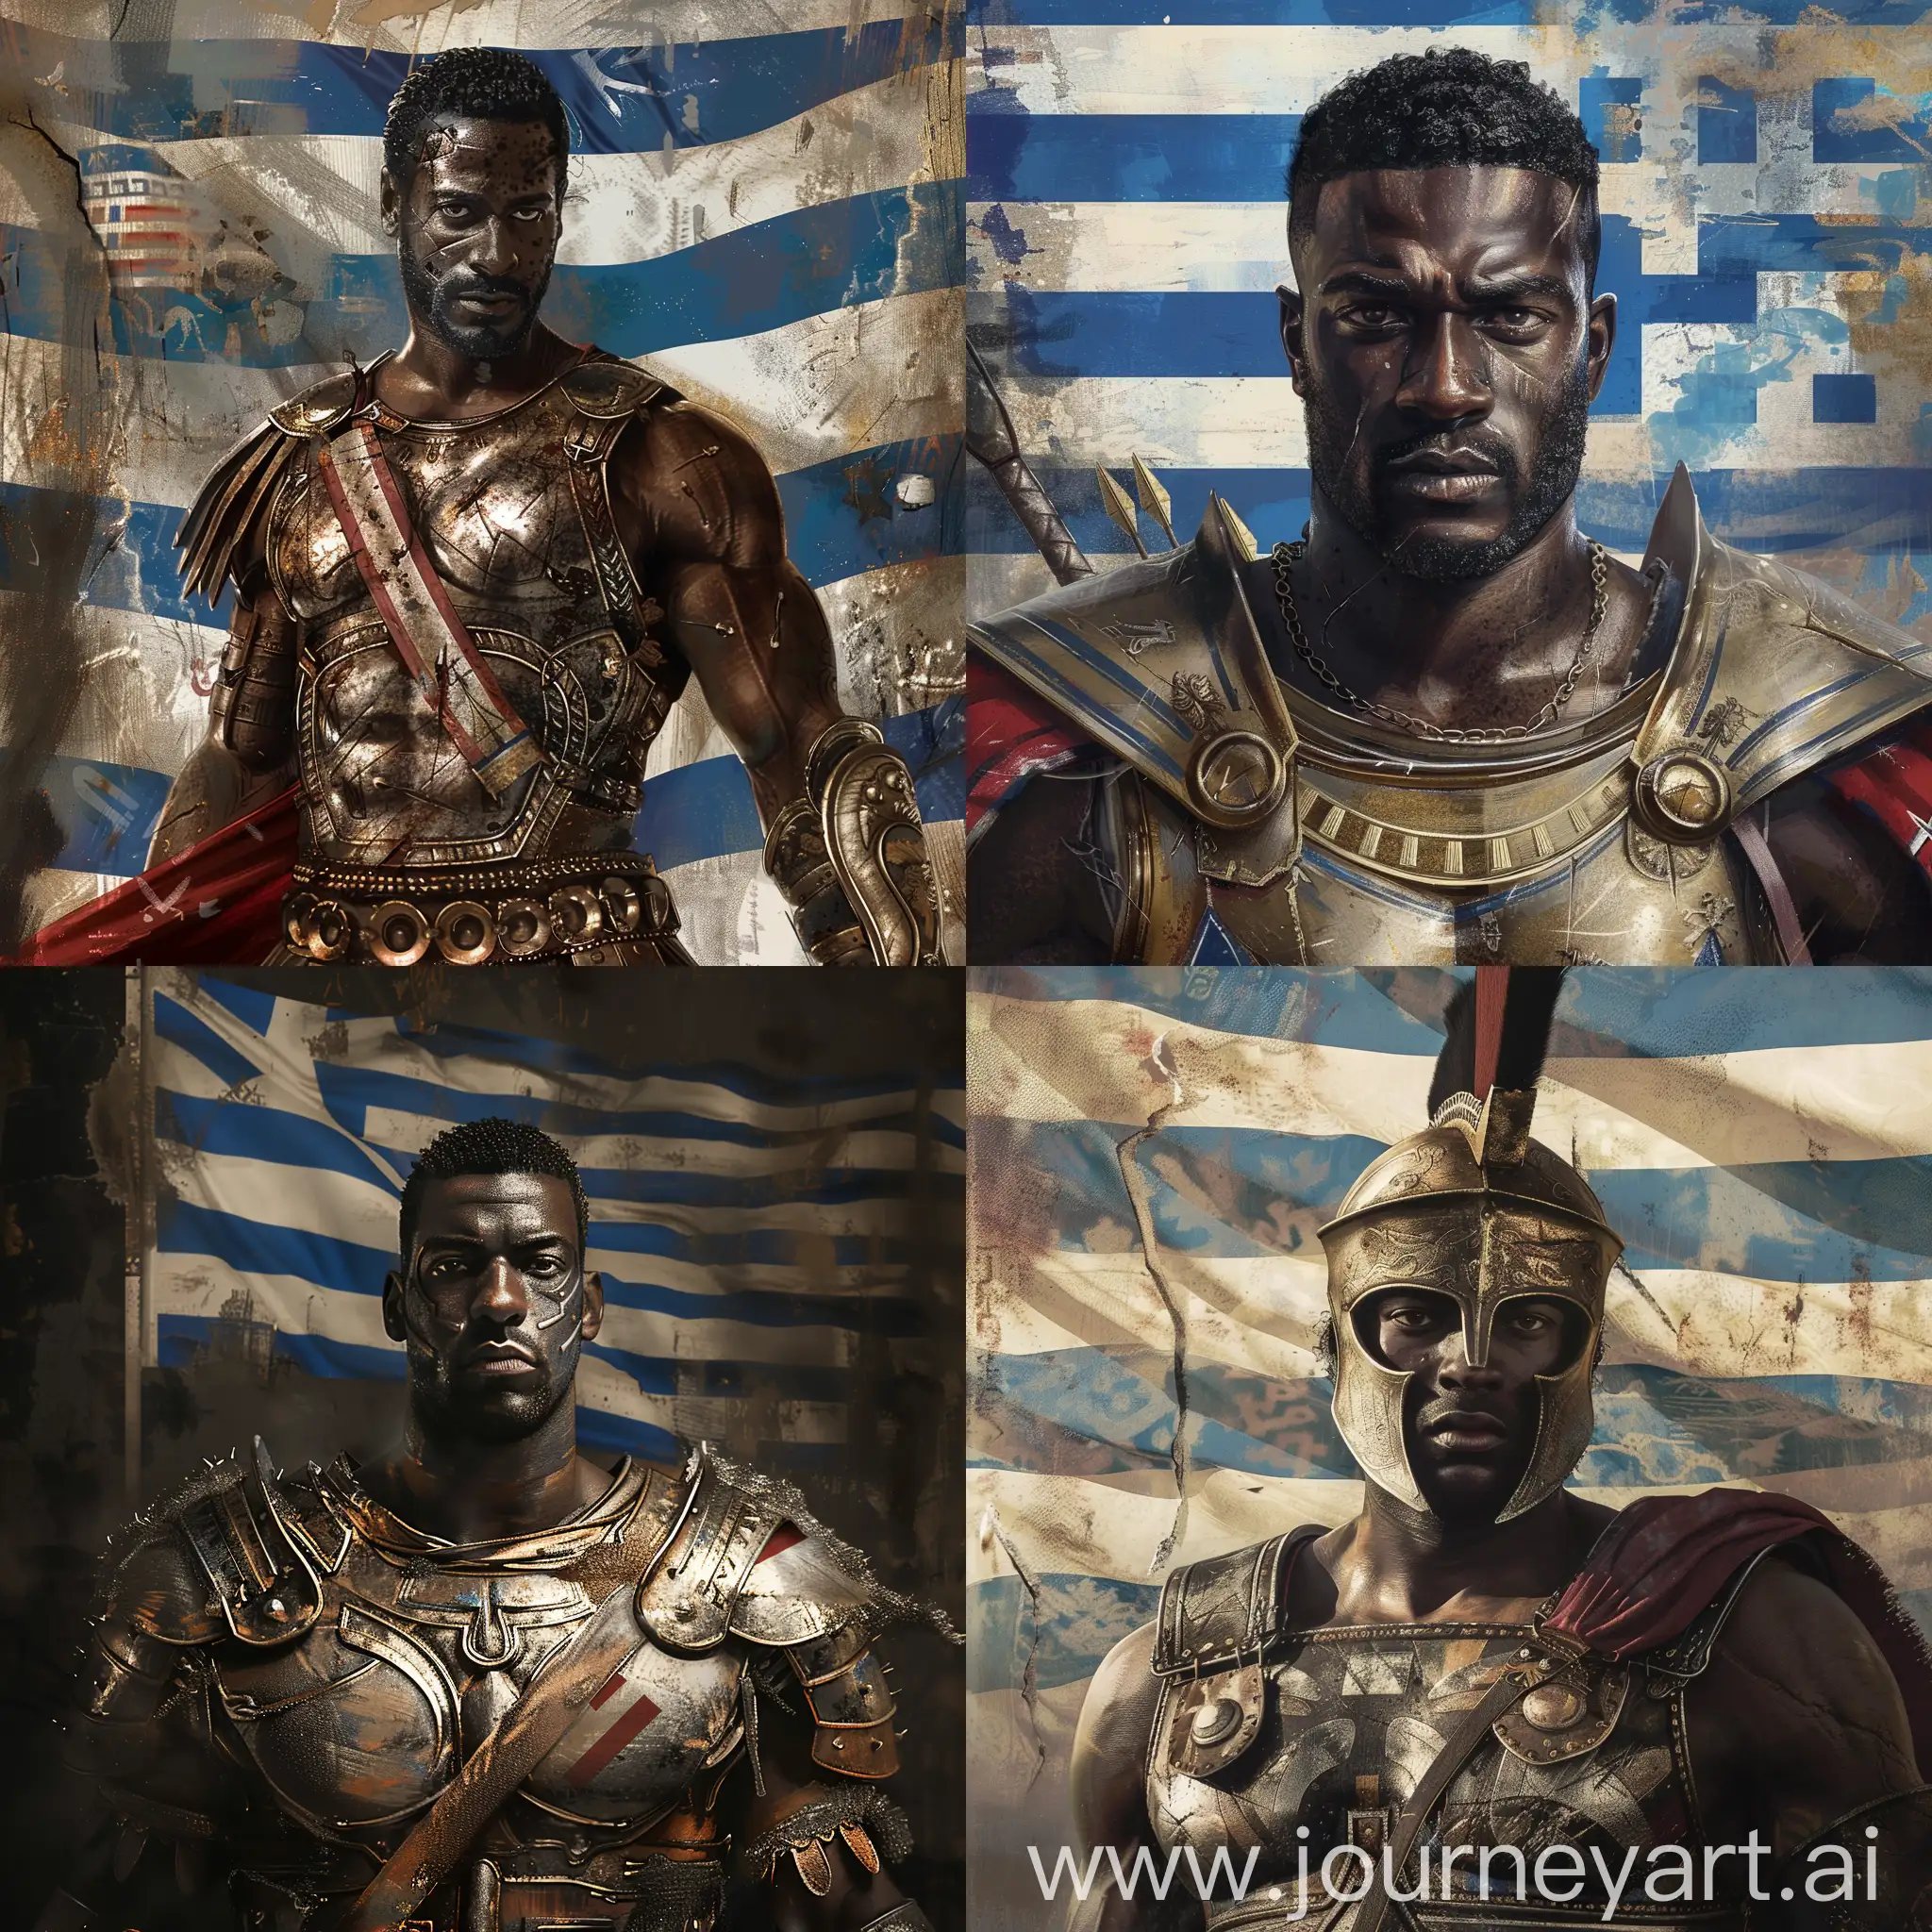 generate me a detailed picture of black man wearing spartan armor with the greek flag behind him ,